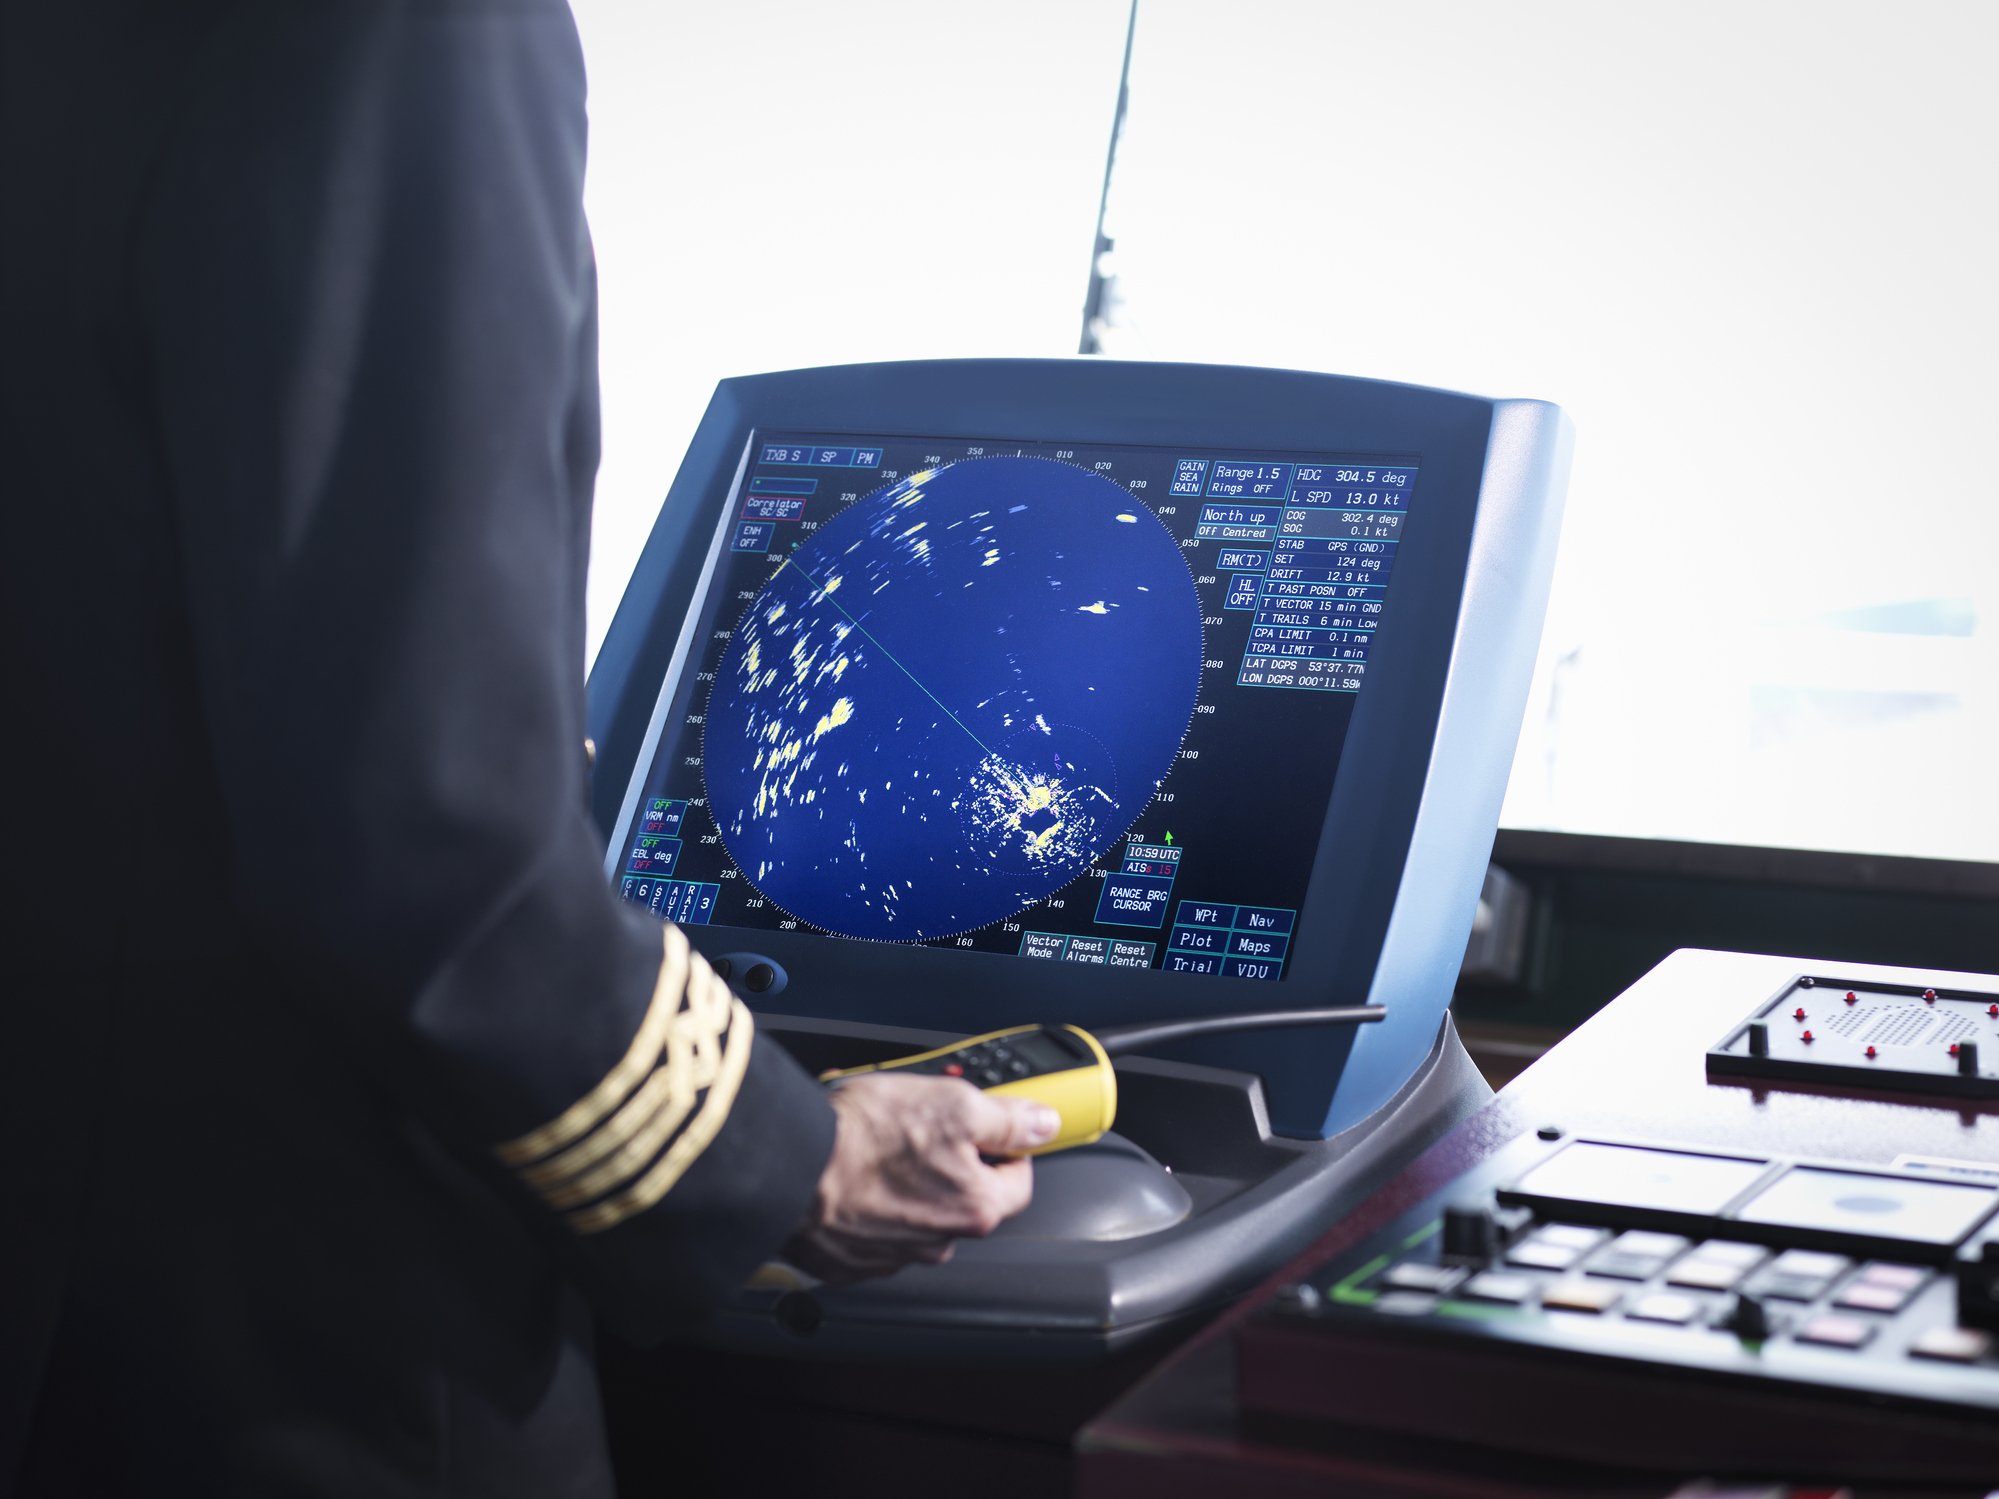 Ships captain working on bridge with radar screen, close up | Photo: Getty Images